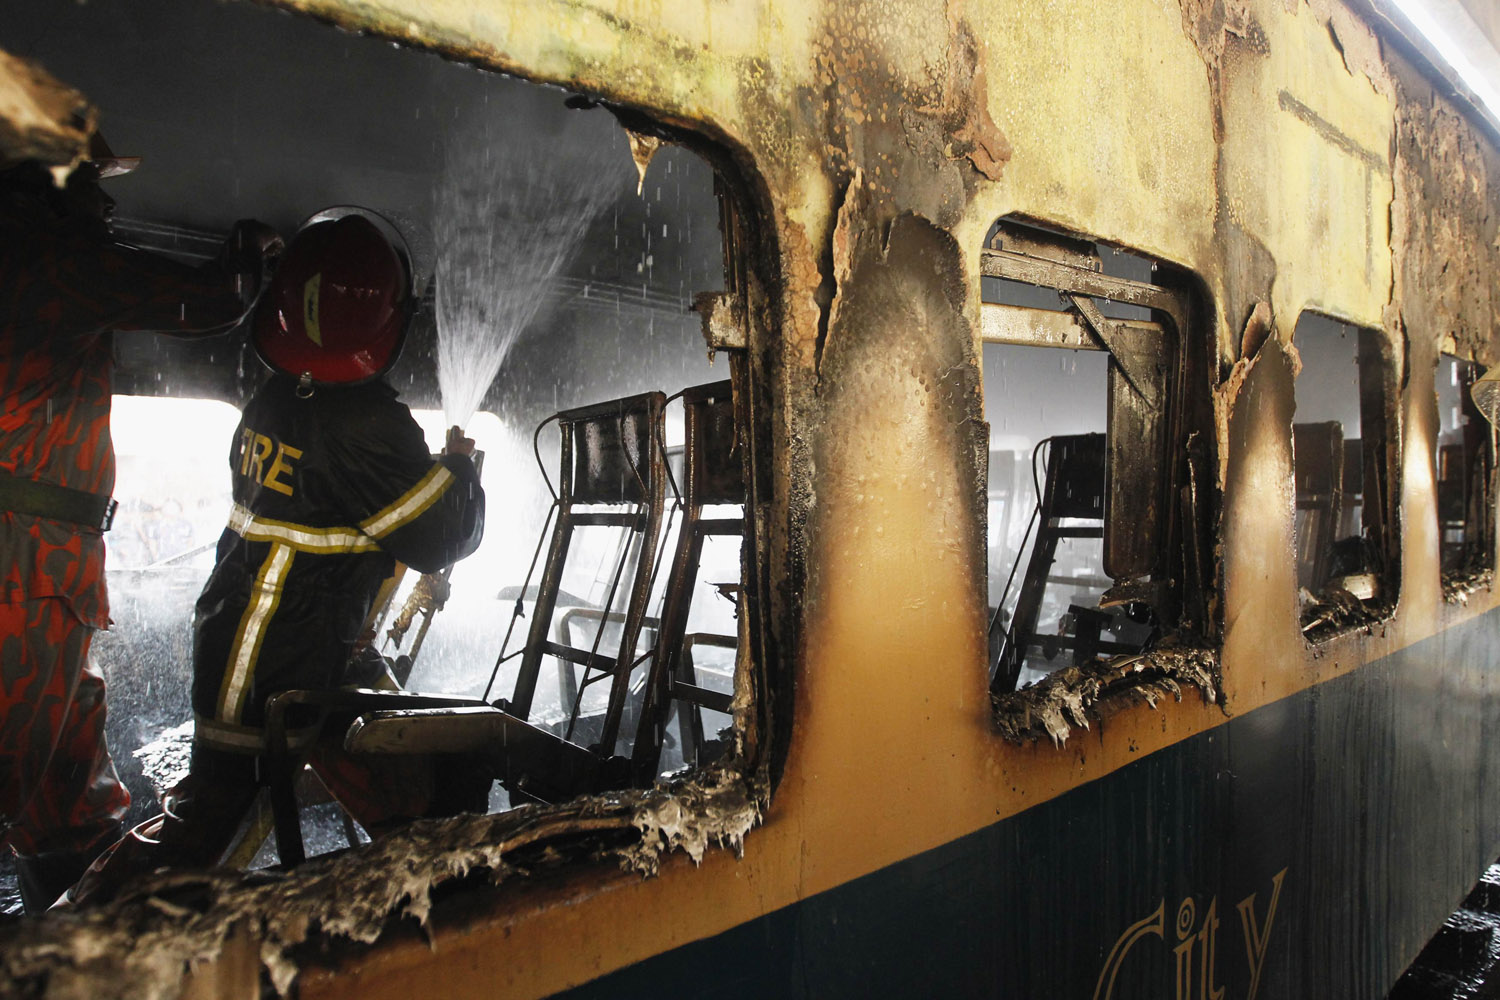 A fire fighter sprays water inside the burnt compartment of a train at Kamlapur Railway Station in Dhaka